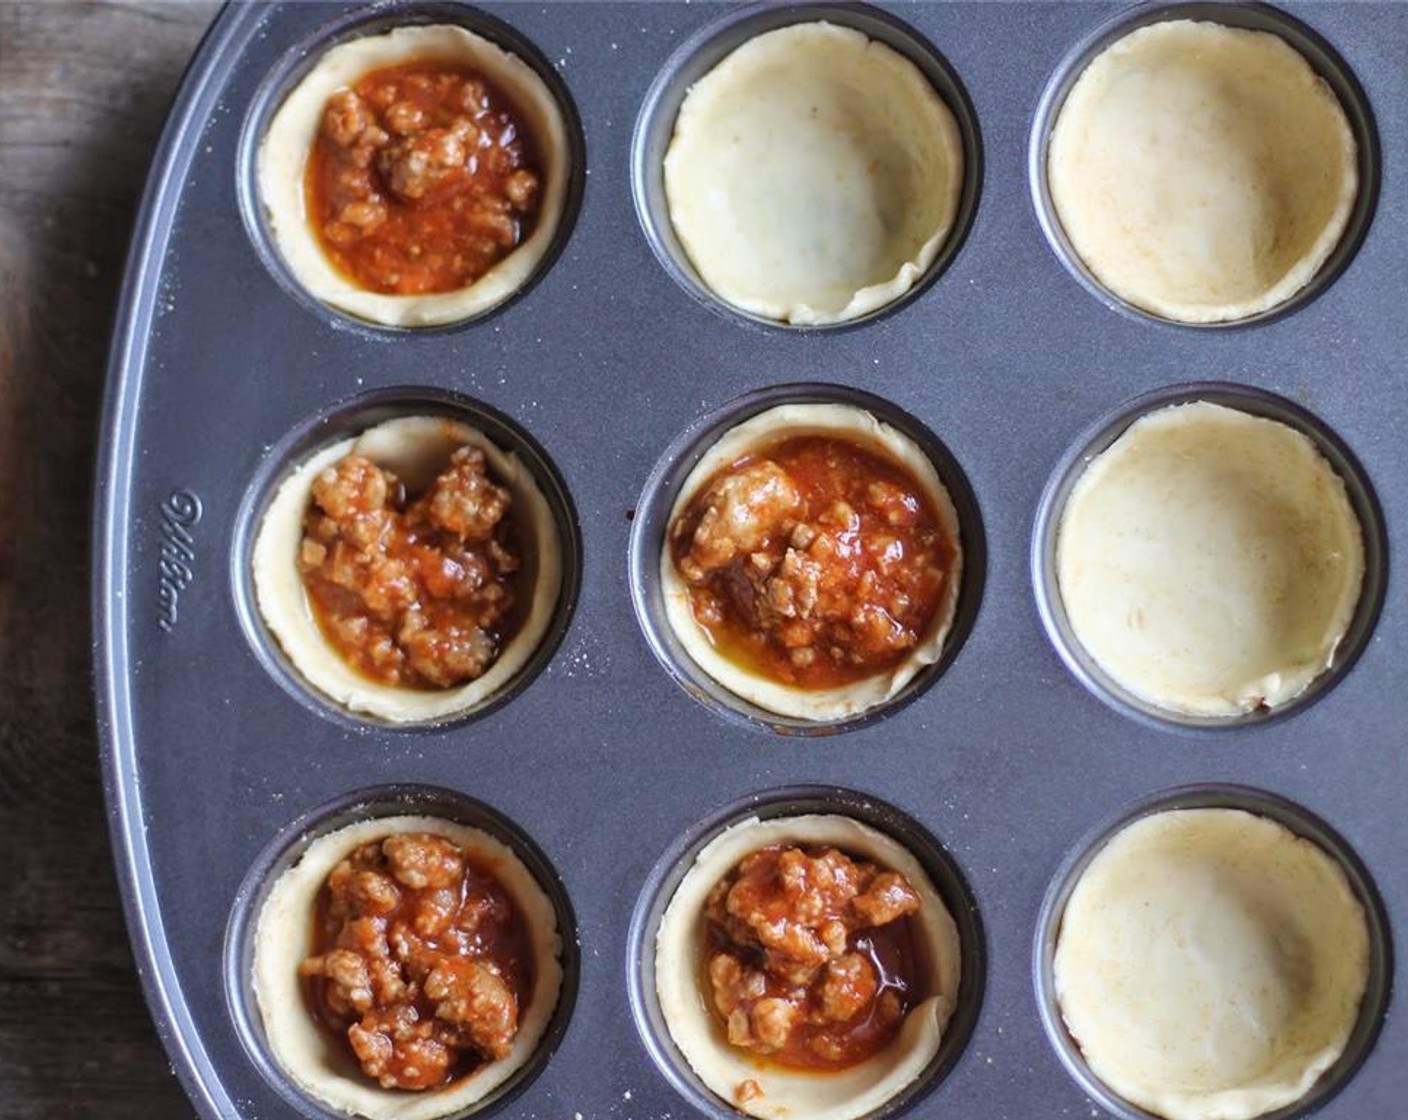 step 4 Place the larger circles of dough into each muffin tin, pressing to form little pies neatly in each tin. Spoon 2 to 3 tablespoons of meat and sauce into each pie.